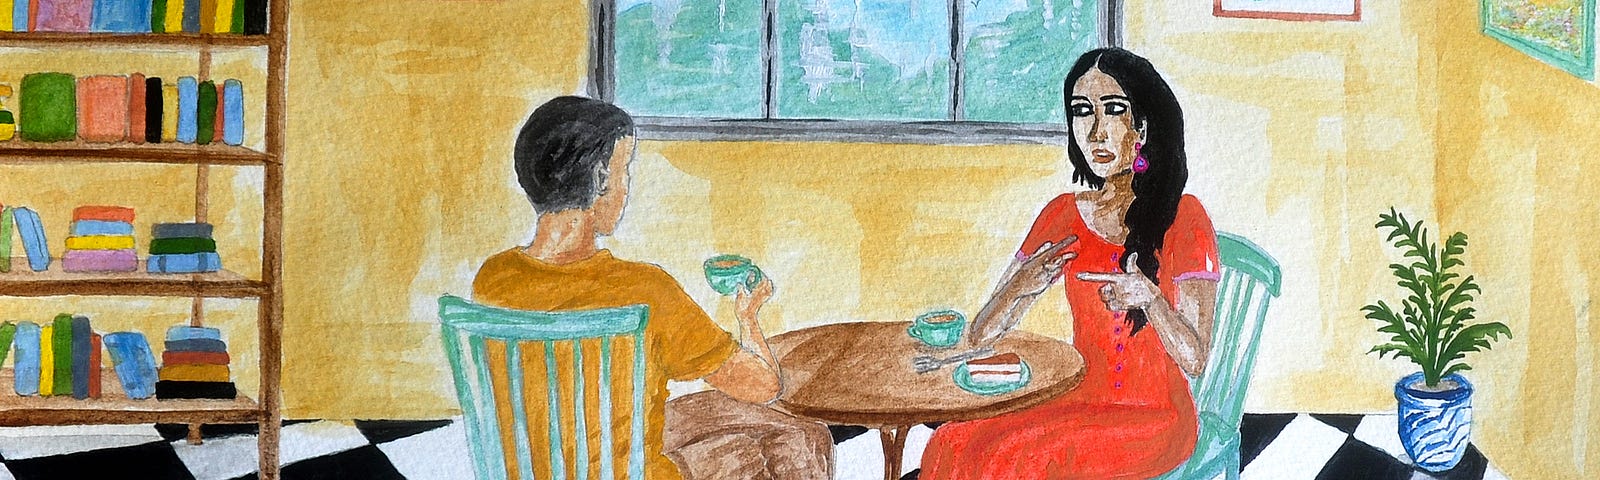 An illustration of two people seated across a table in a room and having a conversation. One of them is signing to the other.